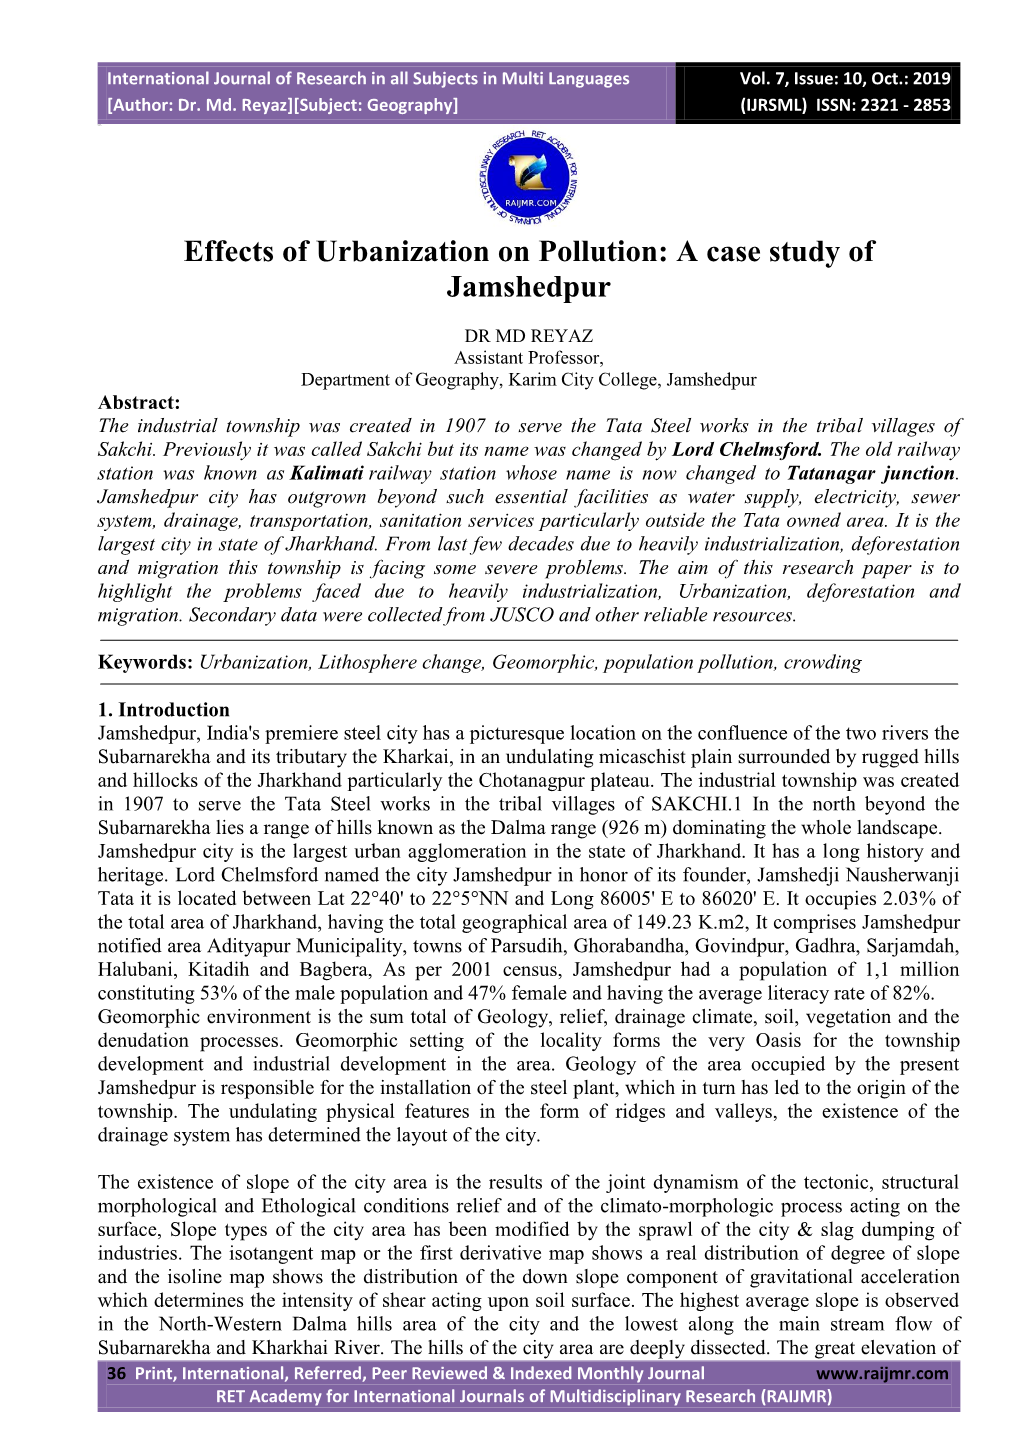 Effects of Urbanization on Pollution: a Case Study of Jamshedpur